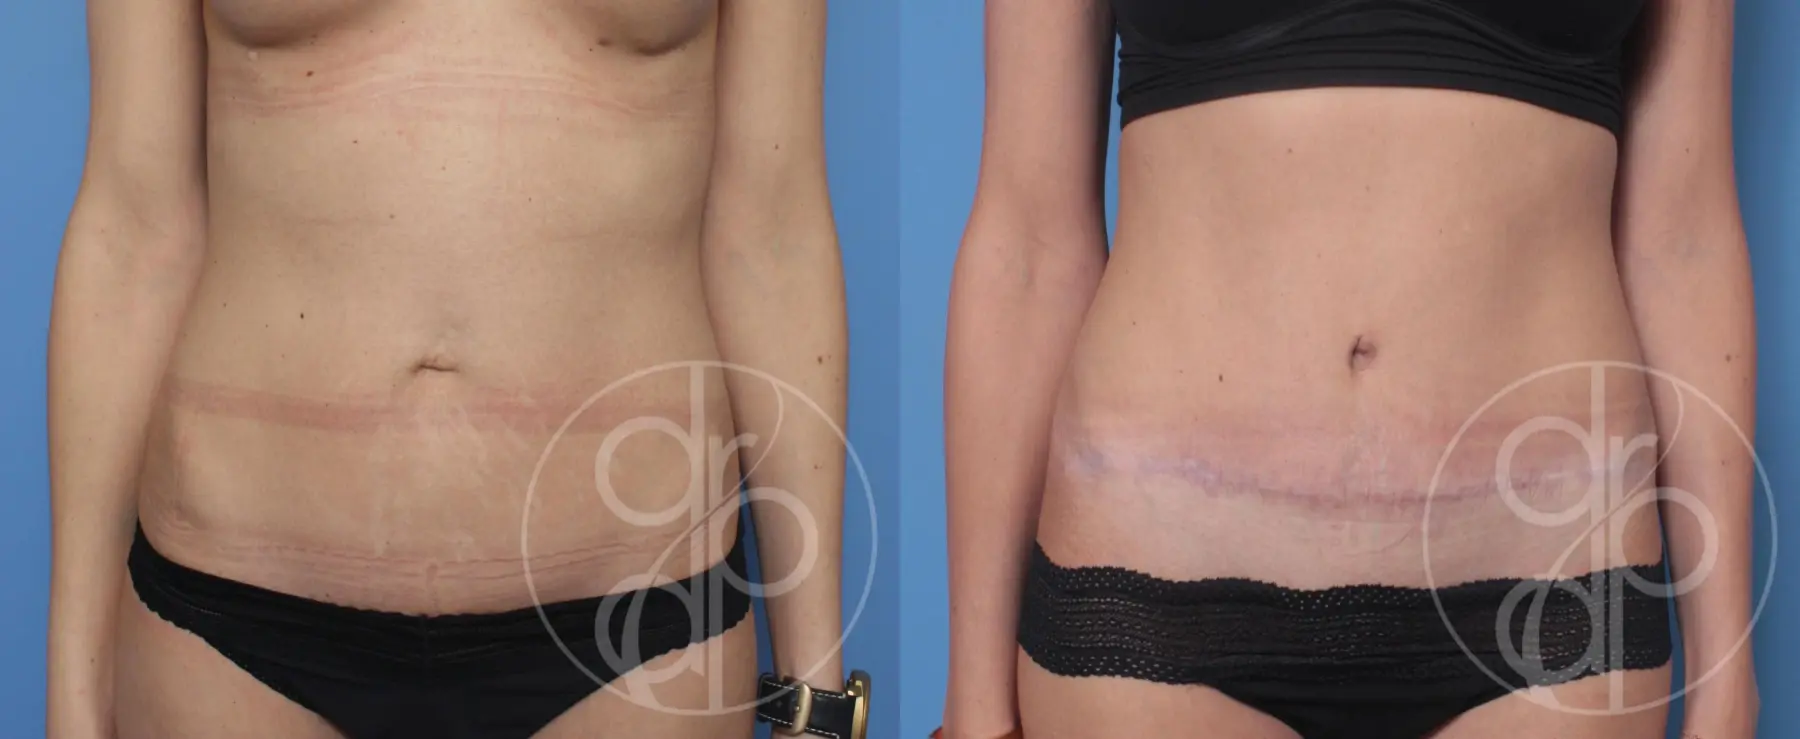 patient 10358 tummy tuck before and after result - Before and After 1